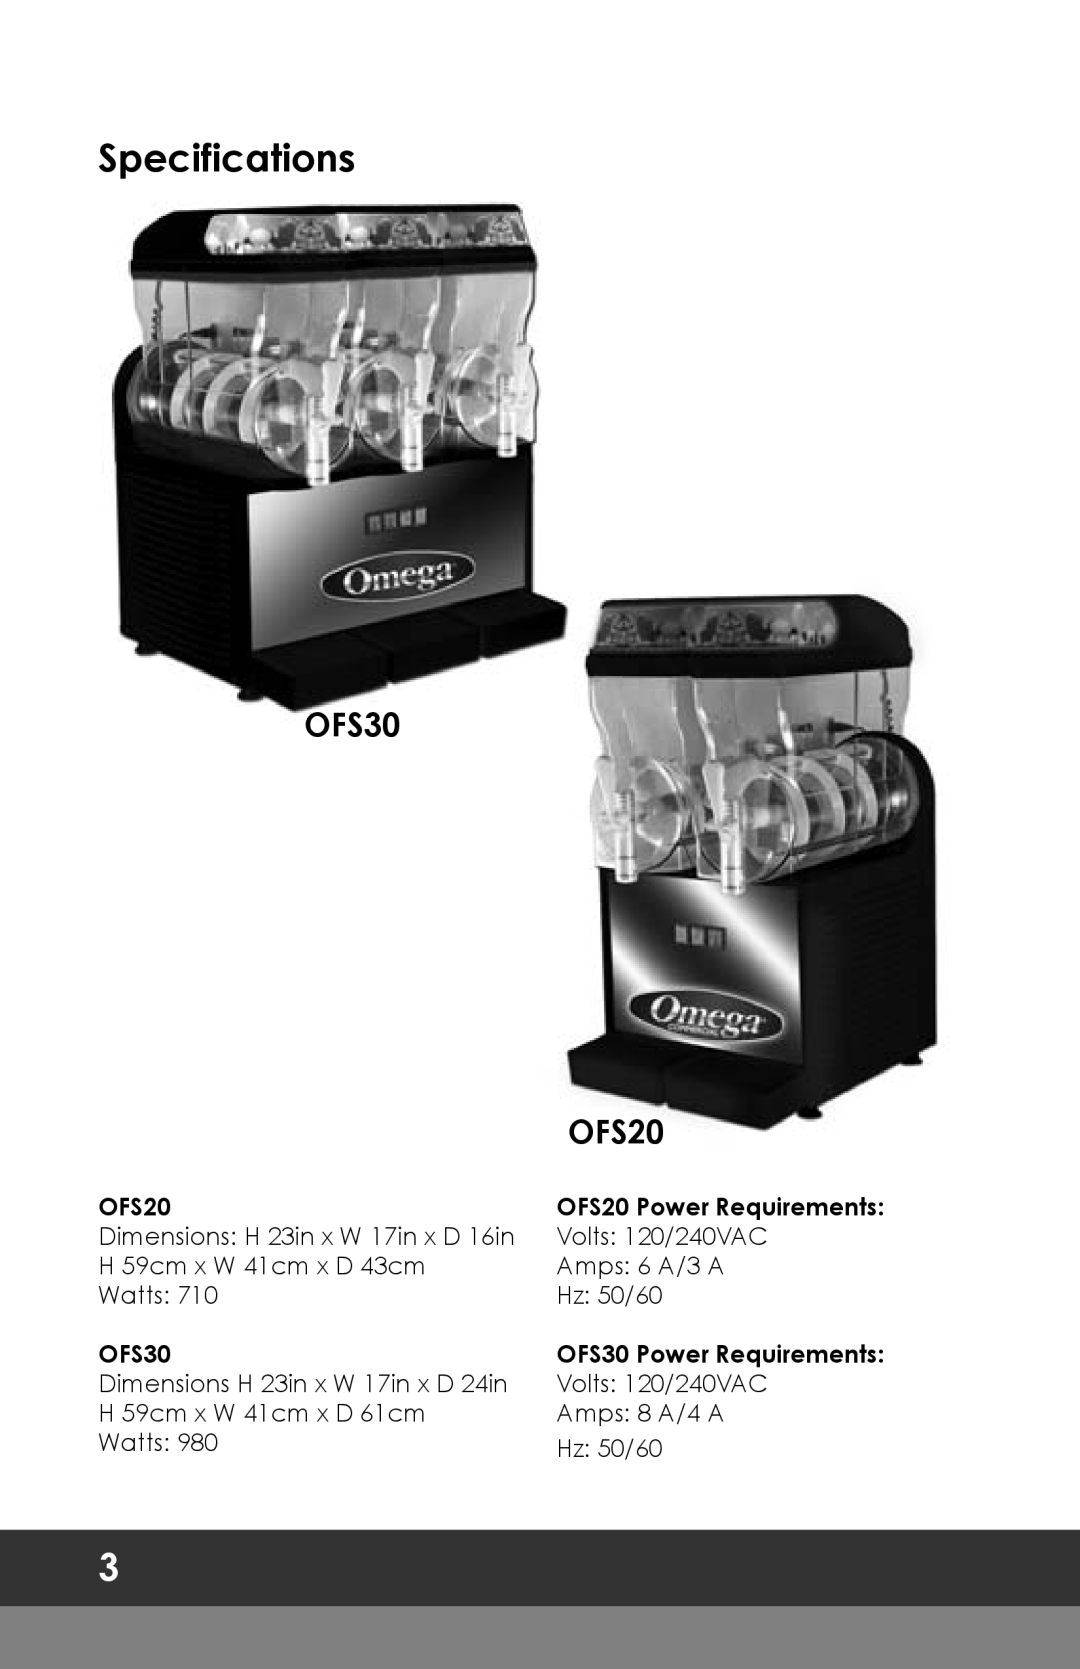 Omega OFS30 instruction manual Specifications, OFS20 